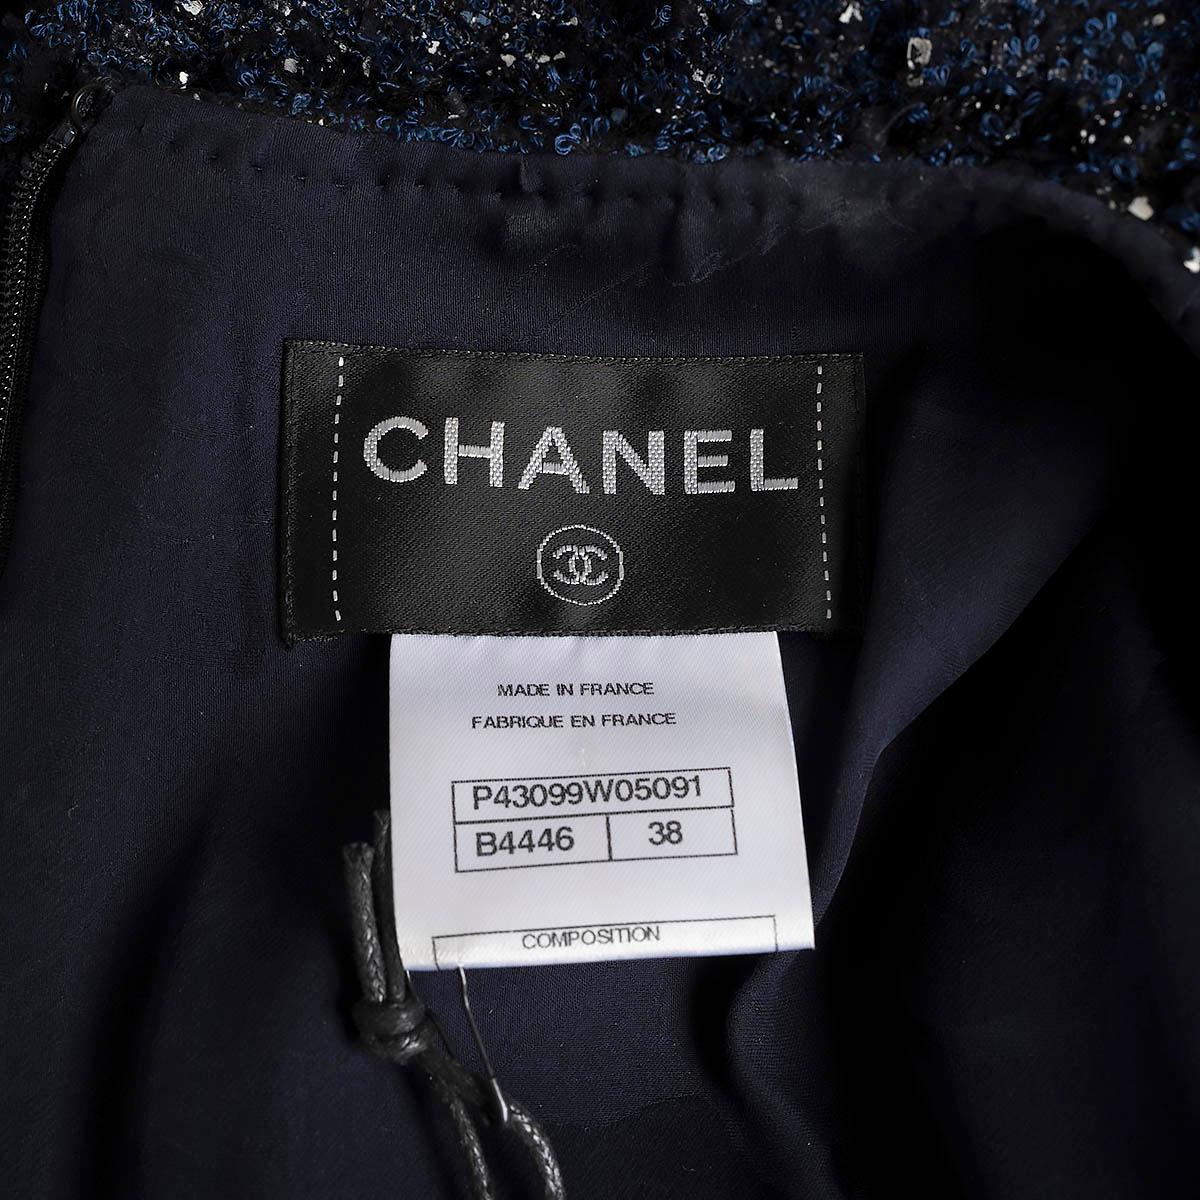 CHANEL navy & black 2012 12P PANELLED TWEED Dress 38 S For Sale 4